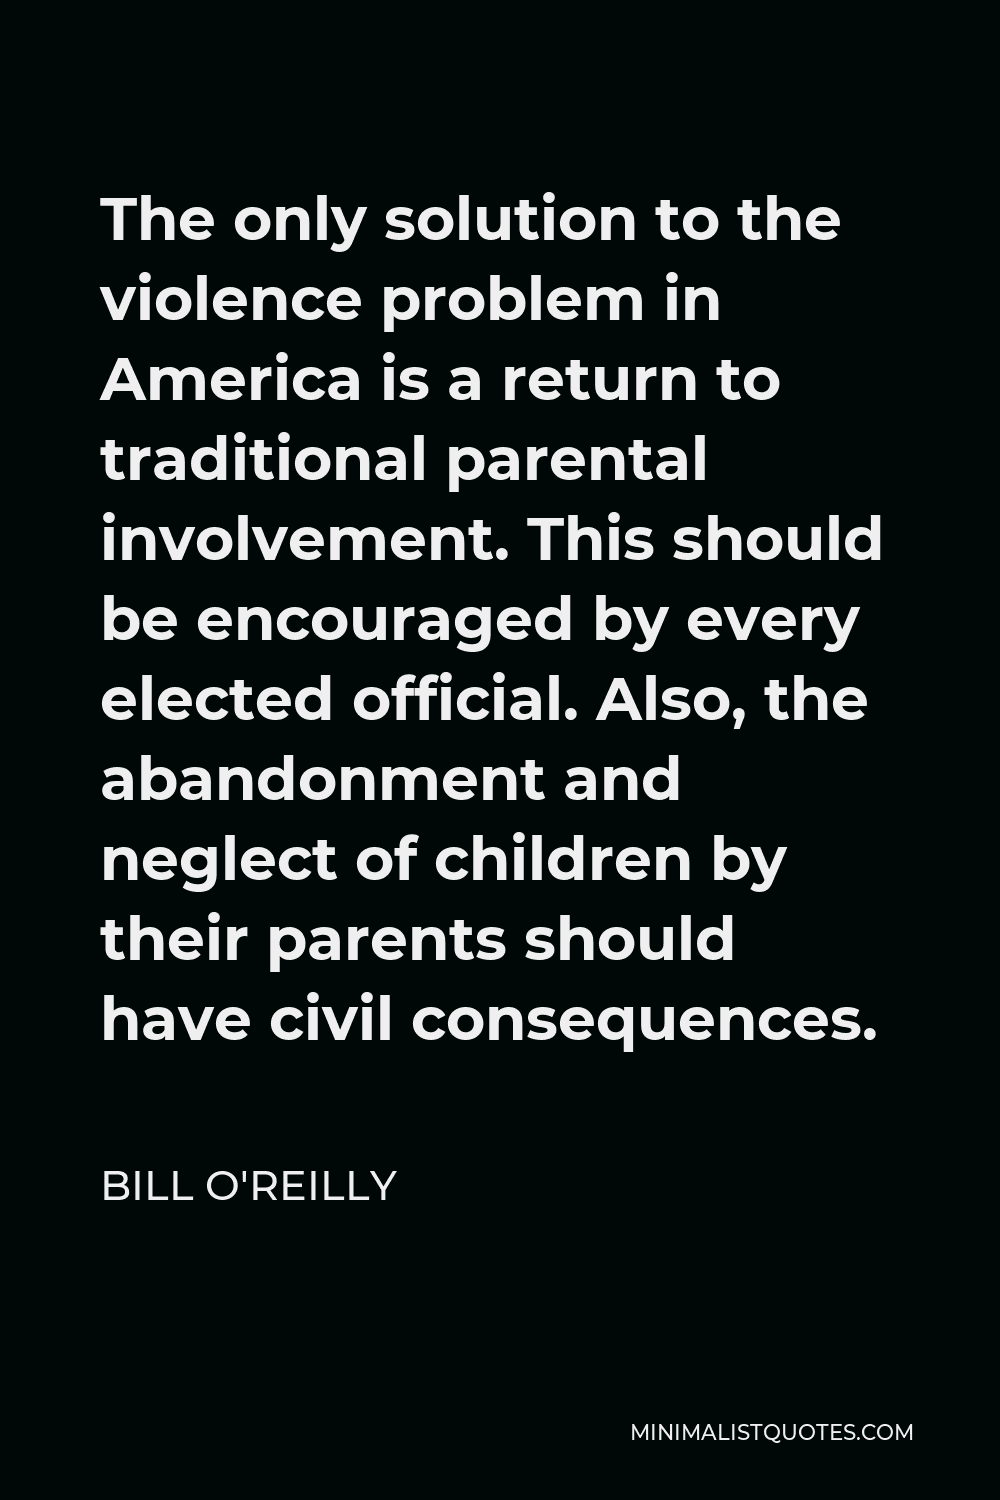 Bill O'Reilly Quote - The only solution to the violence problem in America is a return to traditional parental involvement. This should be encouraged by every elected official. Also, the abandonment and neglect of children by their parents should have civil consequences.